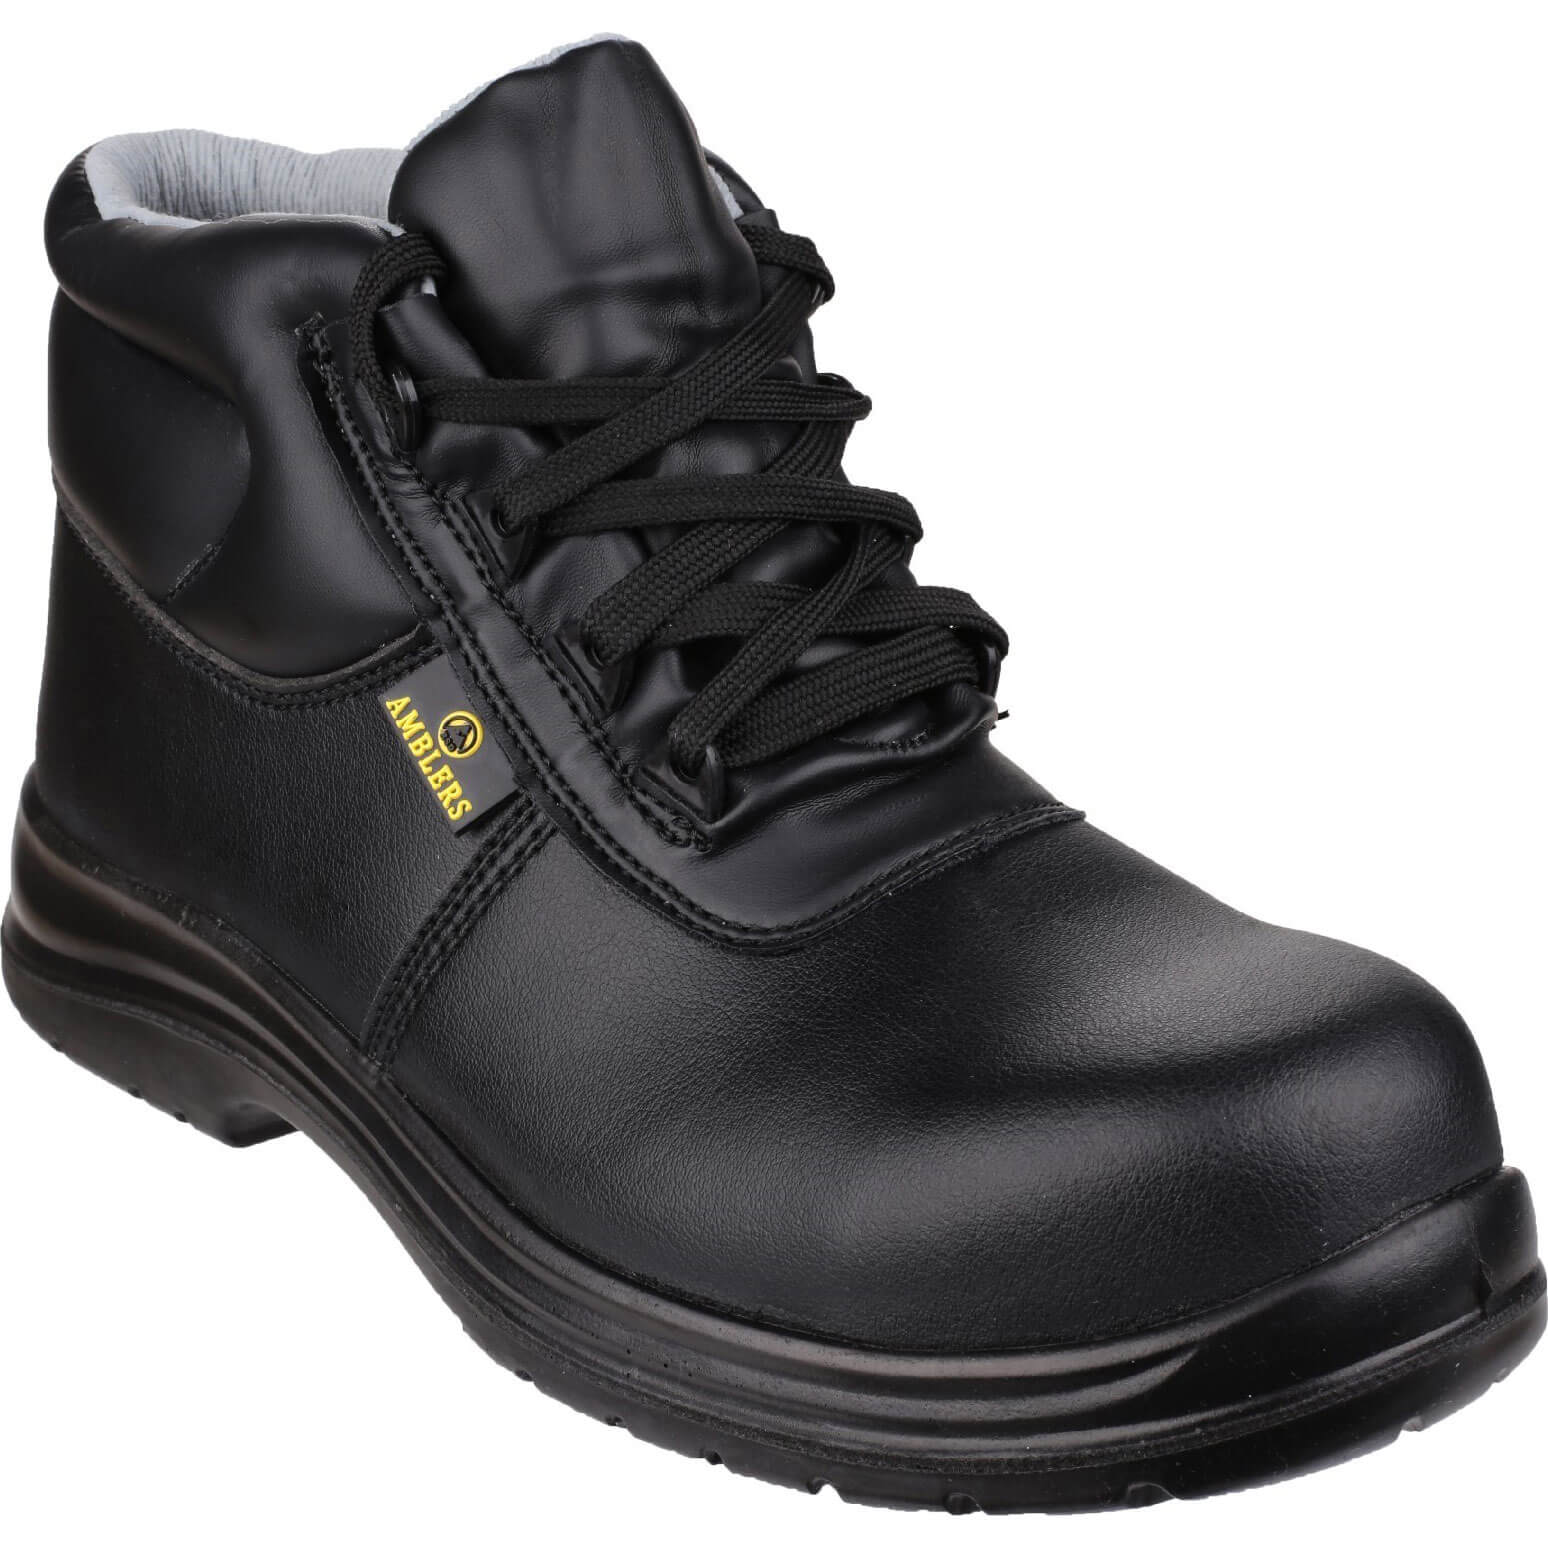 Photo of Amblers Mens Safety Fs663 Metal-free Water-resistant Safety Boots Black Size 10